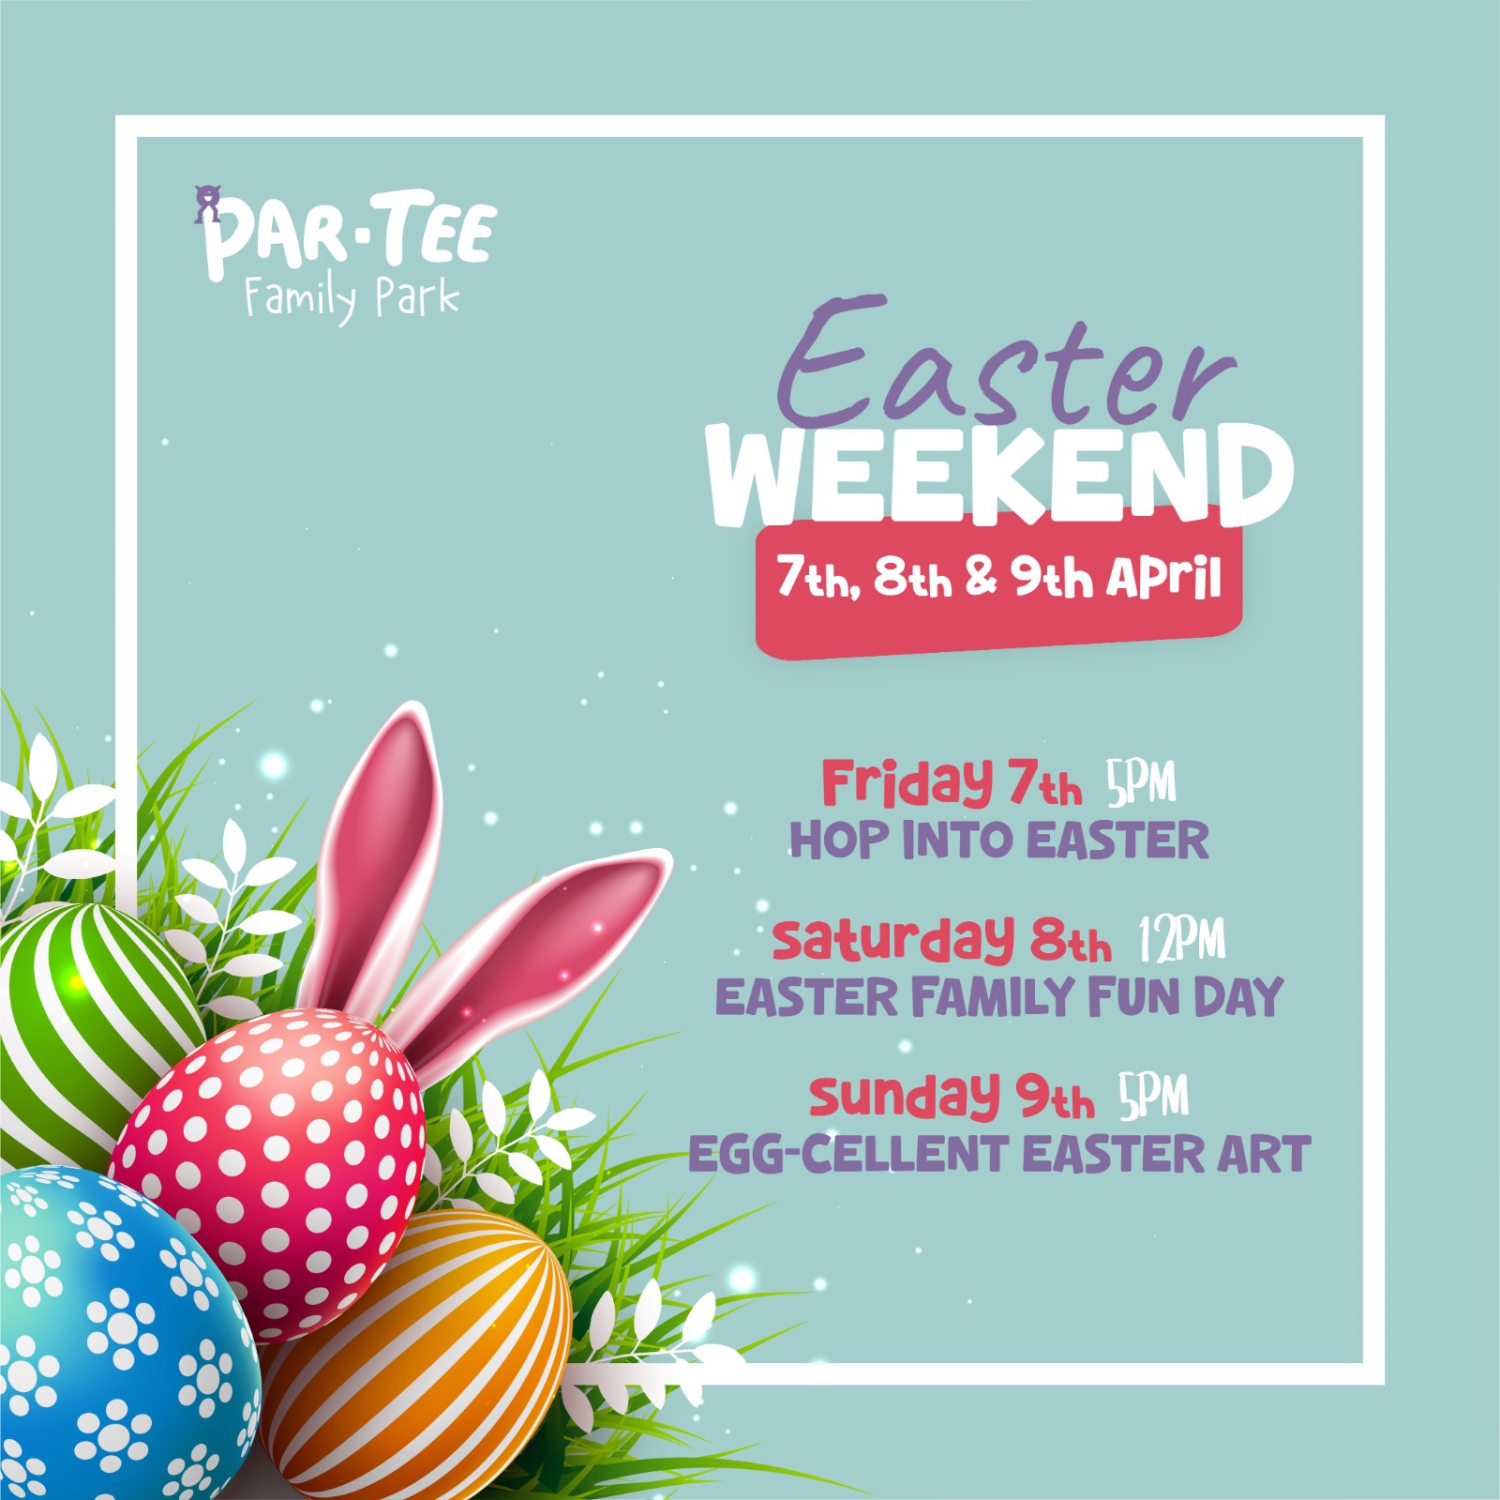 What's on for Easter at Par.Tee Family Park